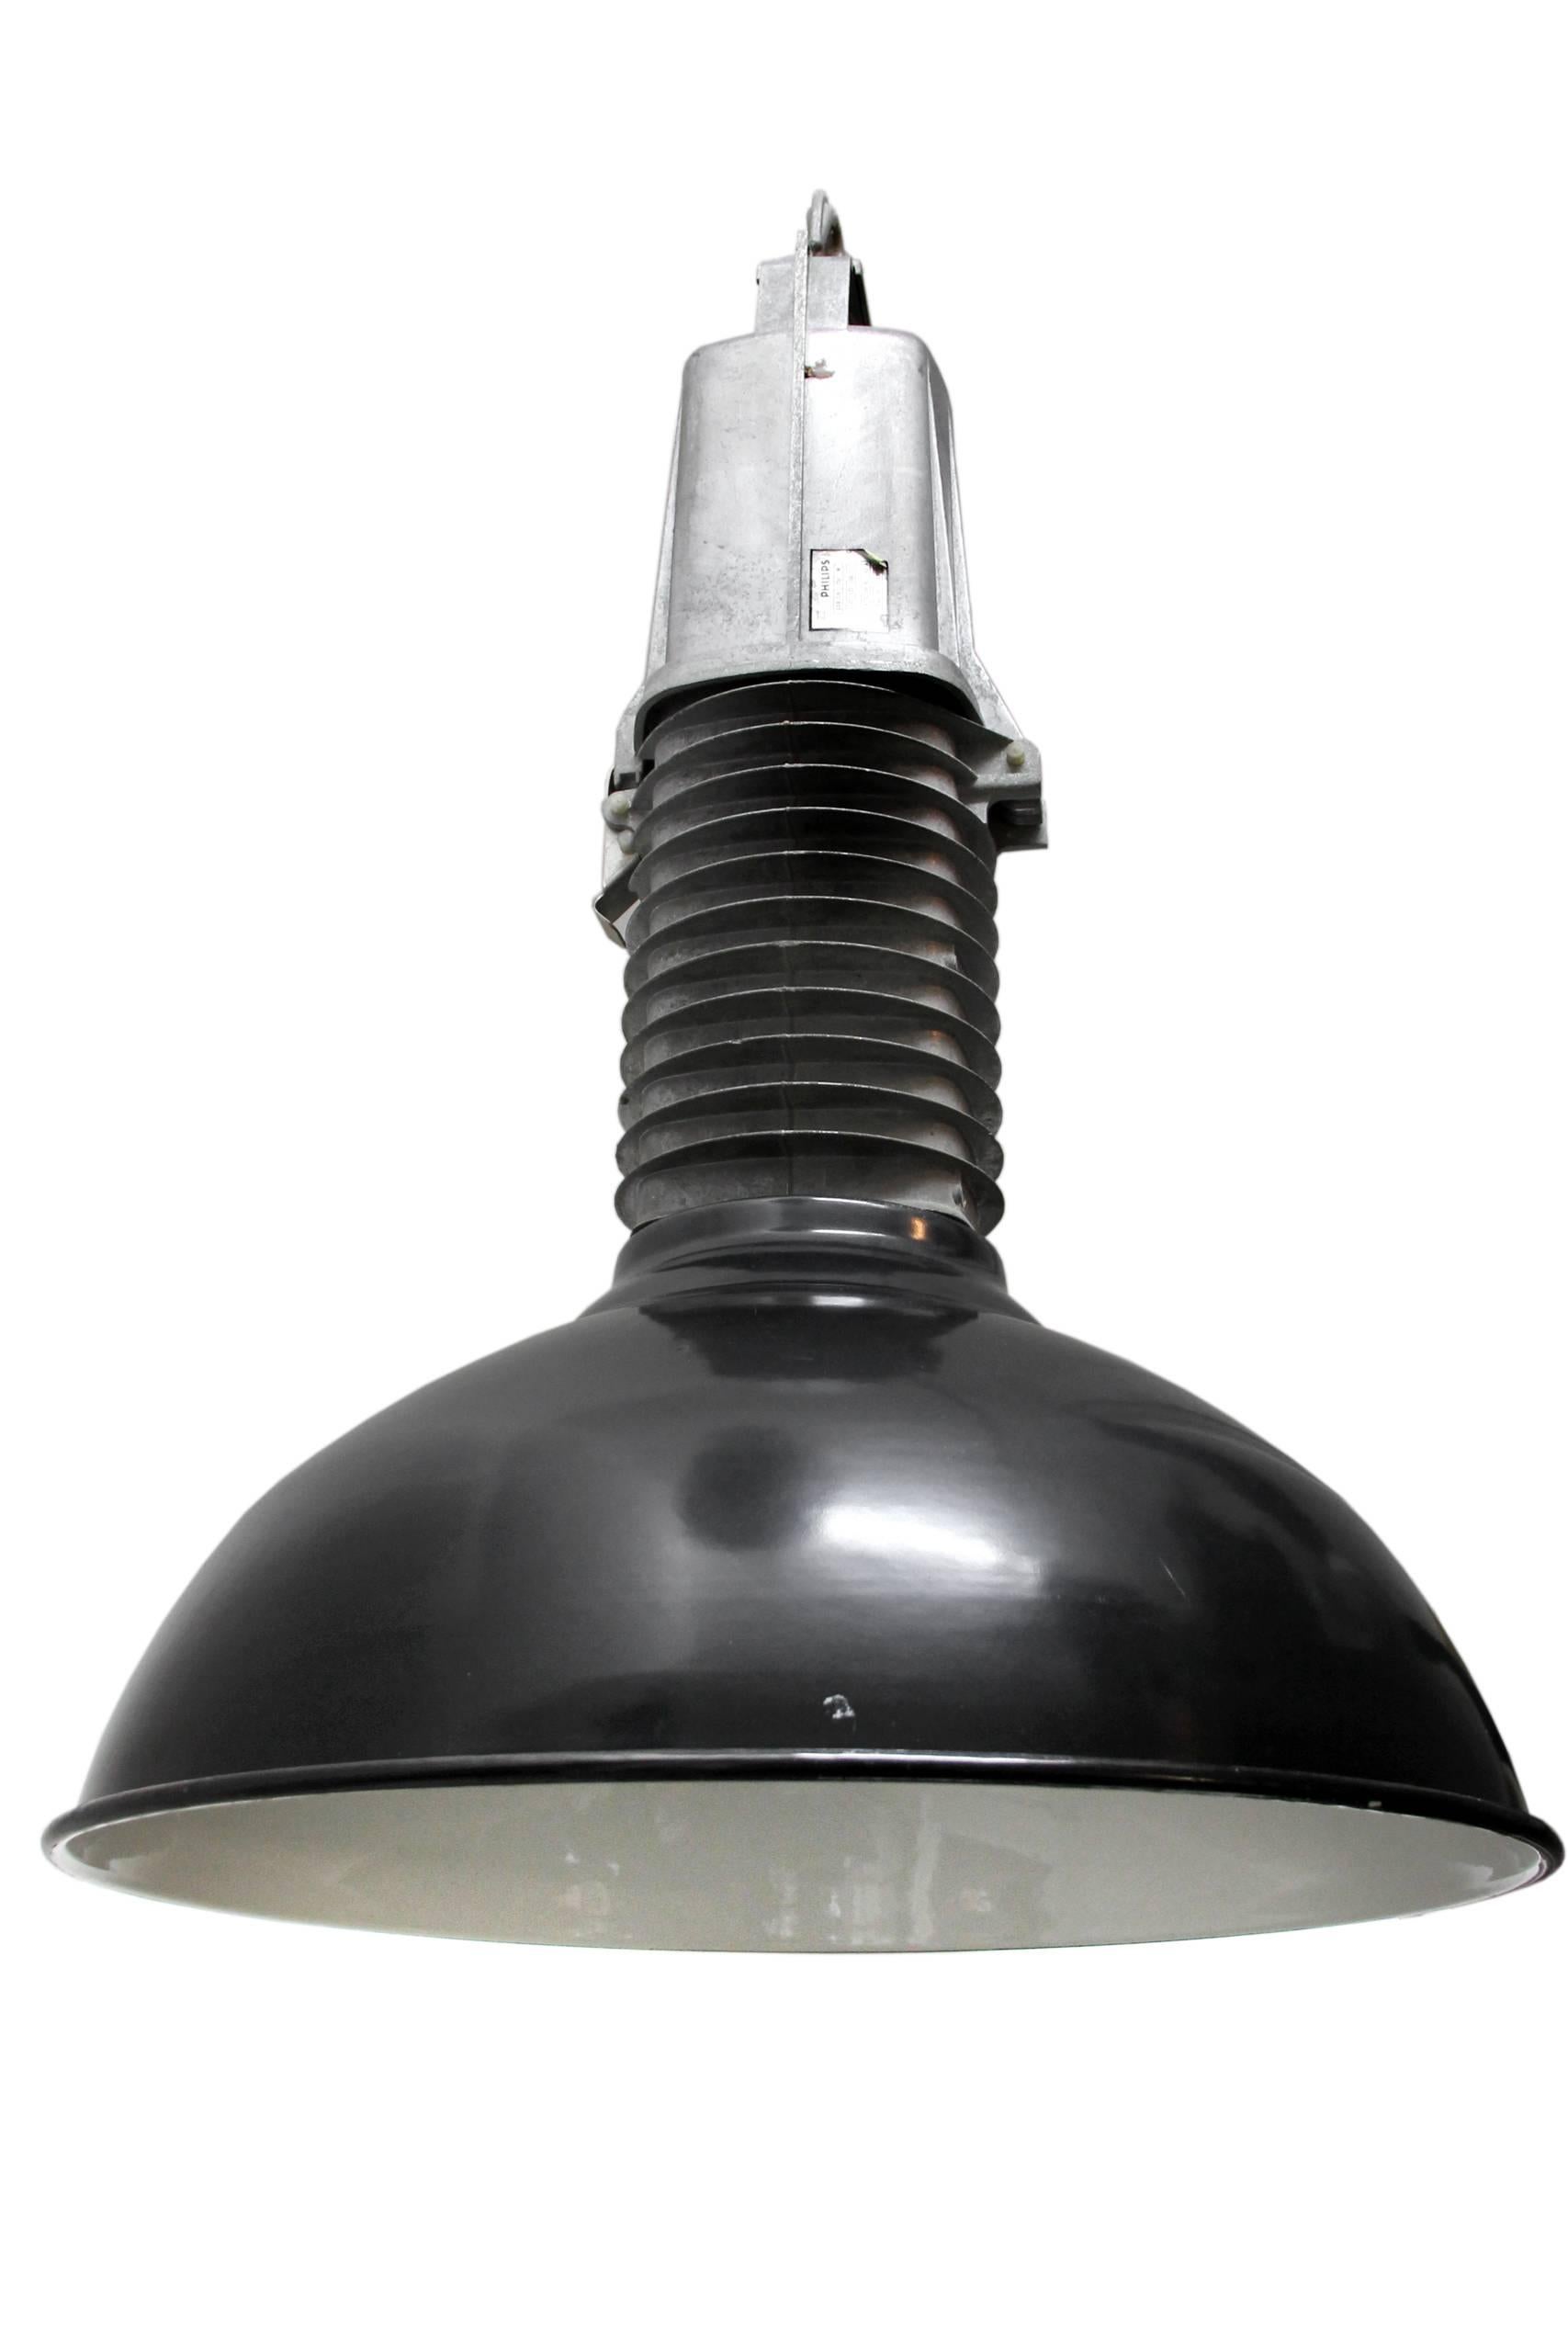 Black Industrial hanging lamp, with aluminium top. Weight: 9.0 kg / 19.8 lb.  

All lamps have been made suitable by international standards for incandescent light bulbs, energy-efficient and LED bulbs with an E26/E27 socket, new wiring CE